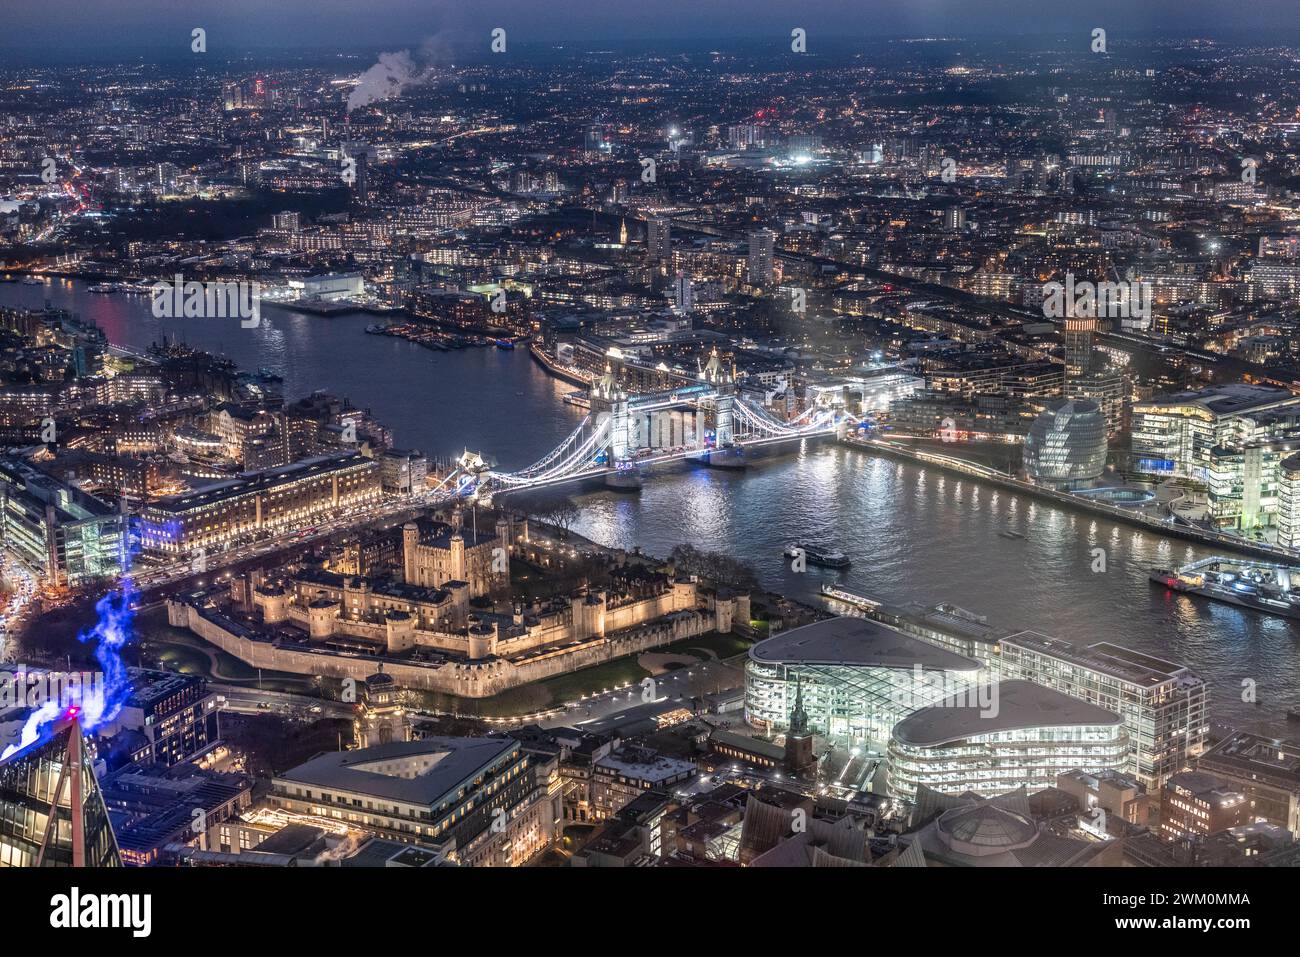 City of London with famous bridge and Thames river at night Stock Photo